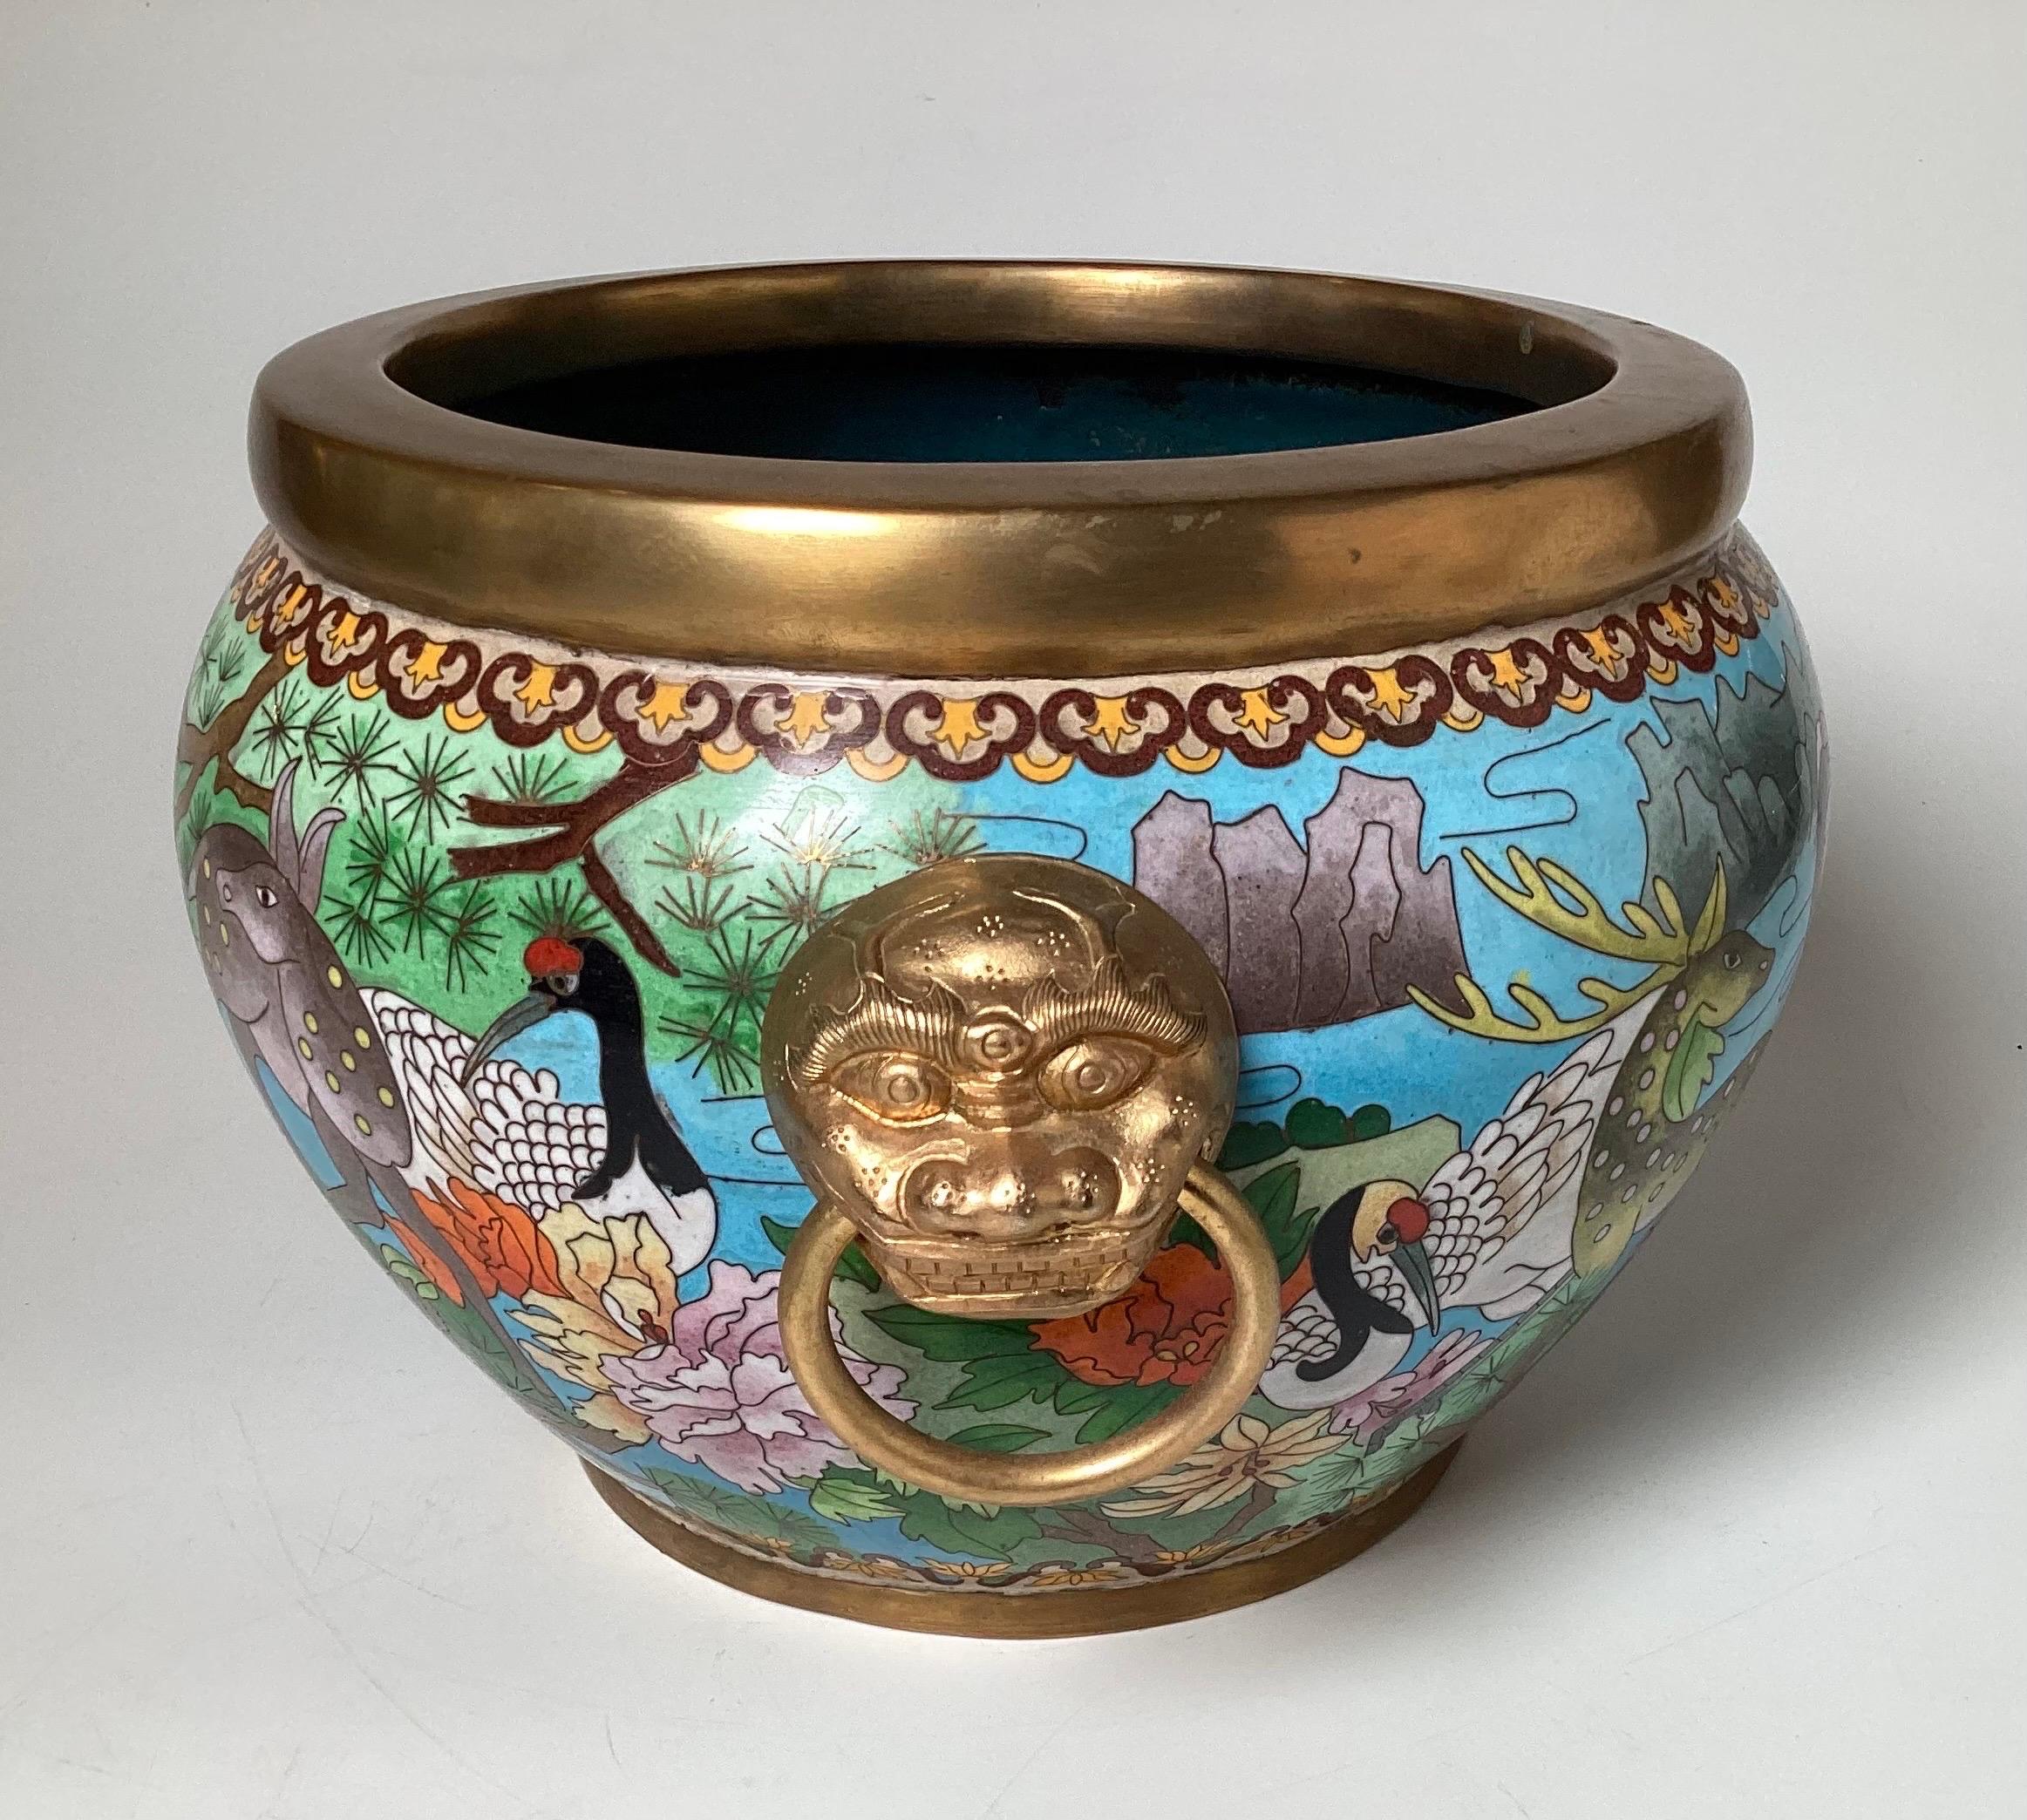 Exquisitely detailed Chinese cloisonné jardinière with deer, cranes and floral decoration with gilt rims and Lion motif handles.  8.5 inches high, 14.5 inches wide, 11.5 inches deep..